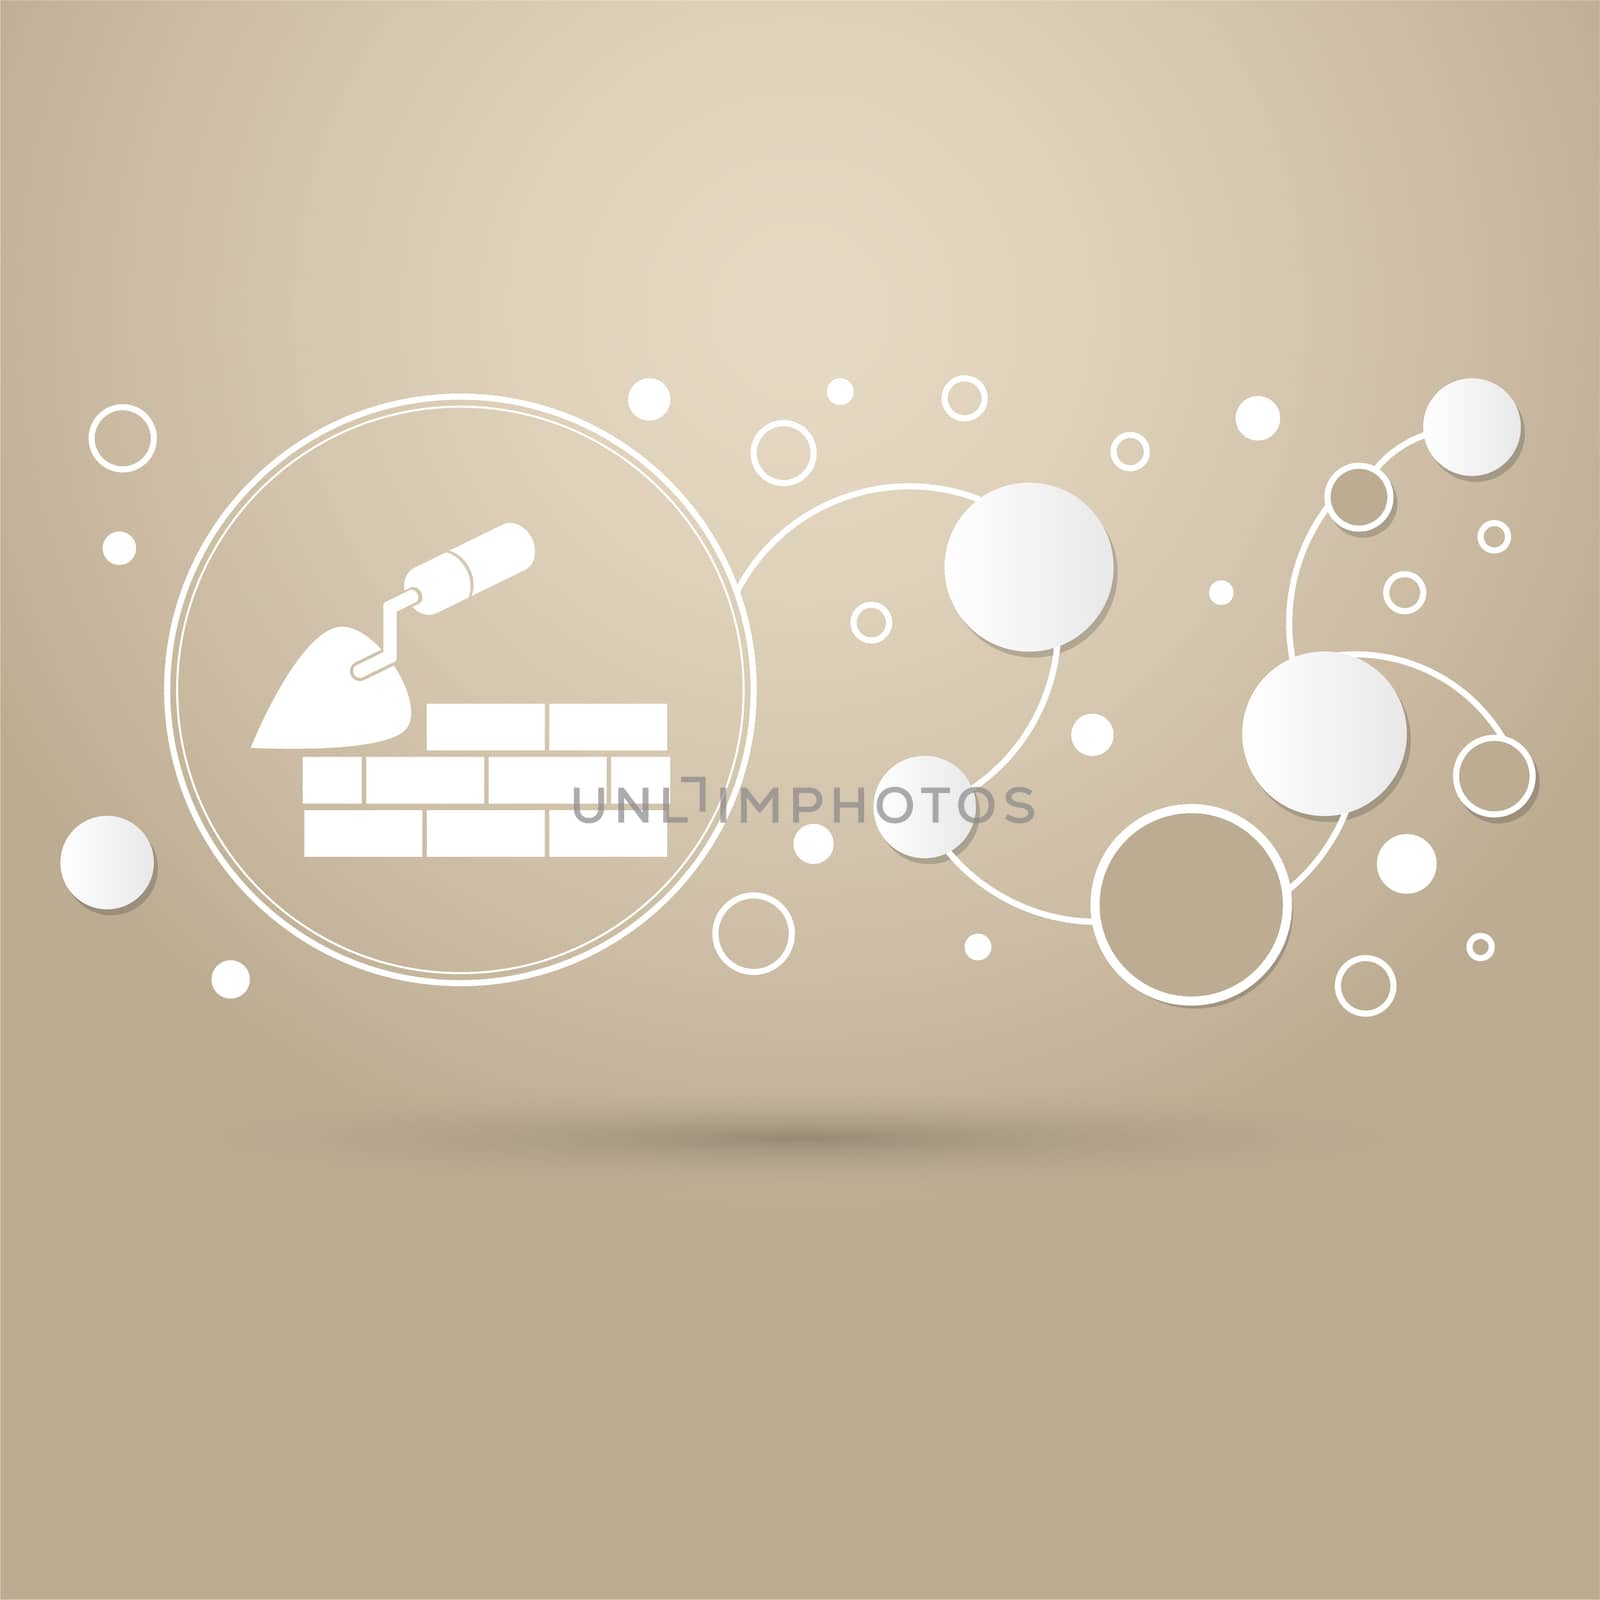 Trowel building and brick wall icon on a brown background with elegant style and modern design infographic. illustration